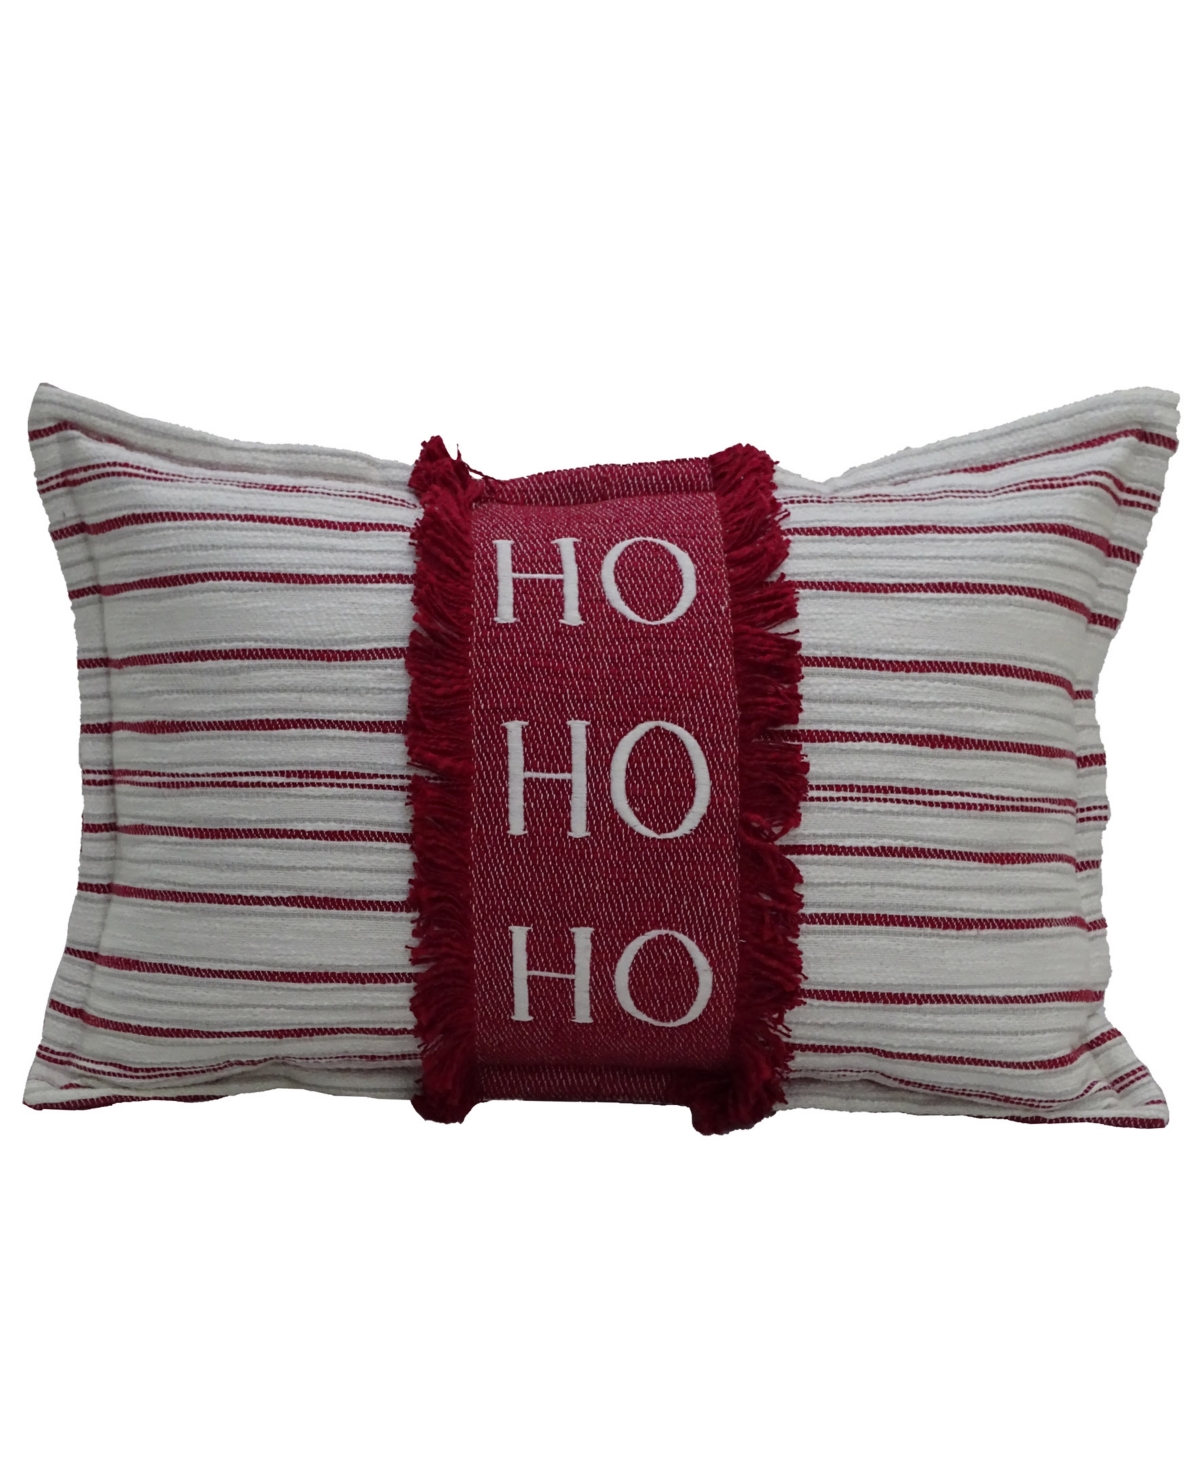 Vibhsa Hohoho Christmas Pillow For Holidays, 24" X 14" In Red/ivory